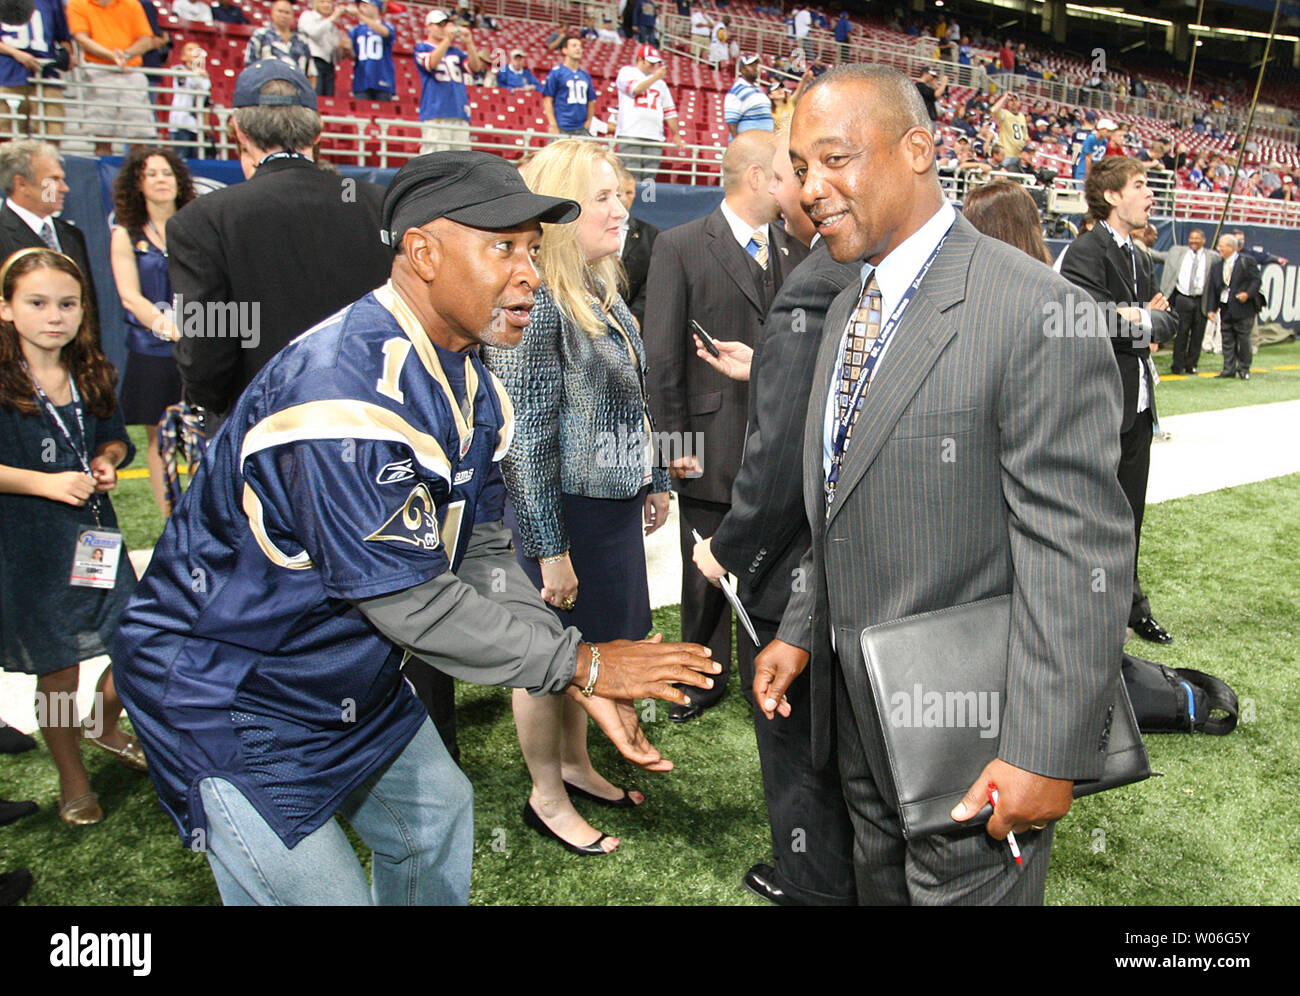 National Baseball Hall of Fame member Ozzie Smith (L) shows former St. Louis Football Cardinals running back Willard Harrell how to take a snap before the St. Louis Rams - New York Giants football game at the Edward Jones Dome in St. Louis on September 12, 2008. New York won the game 41-13.  (UPI Photo/Bill Greenblatt) Stock Photo